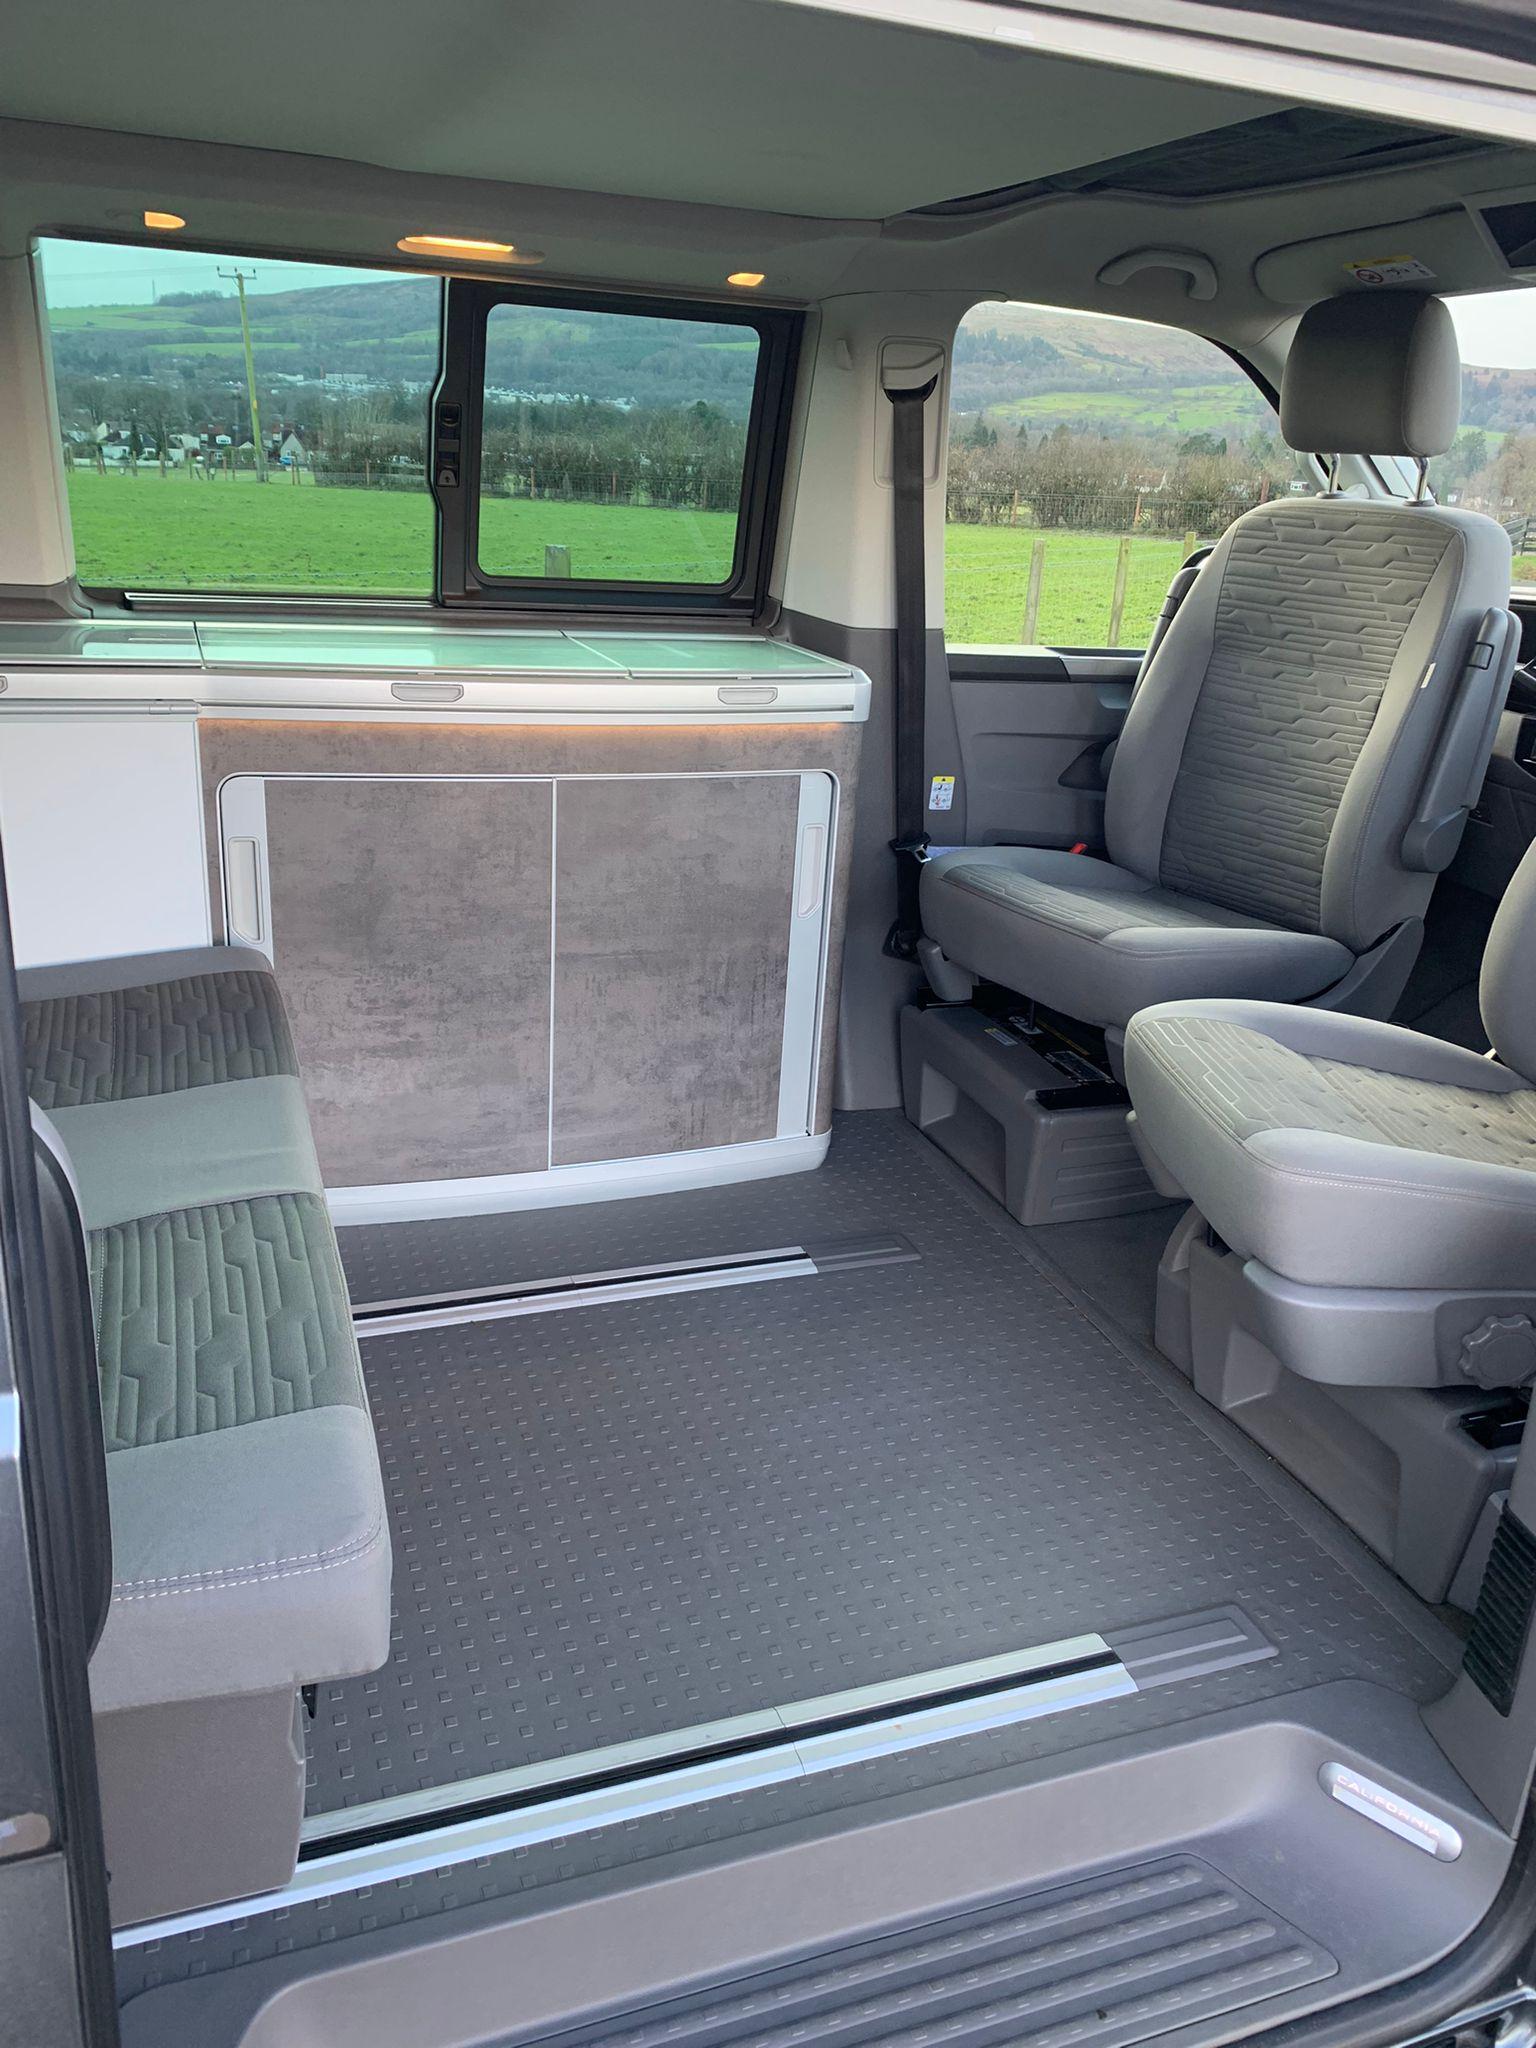 VW California Ocean T6.1 for sale chairs boot